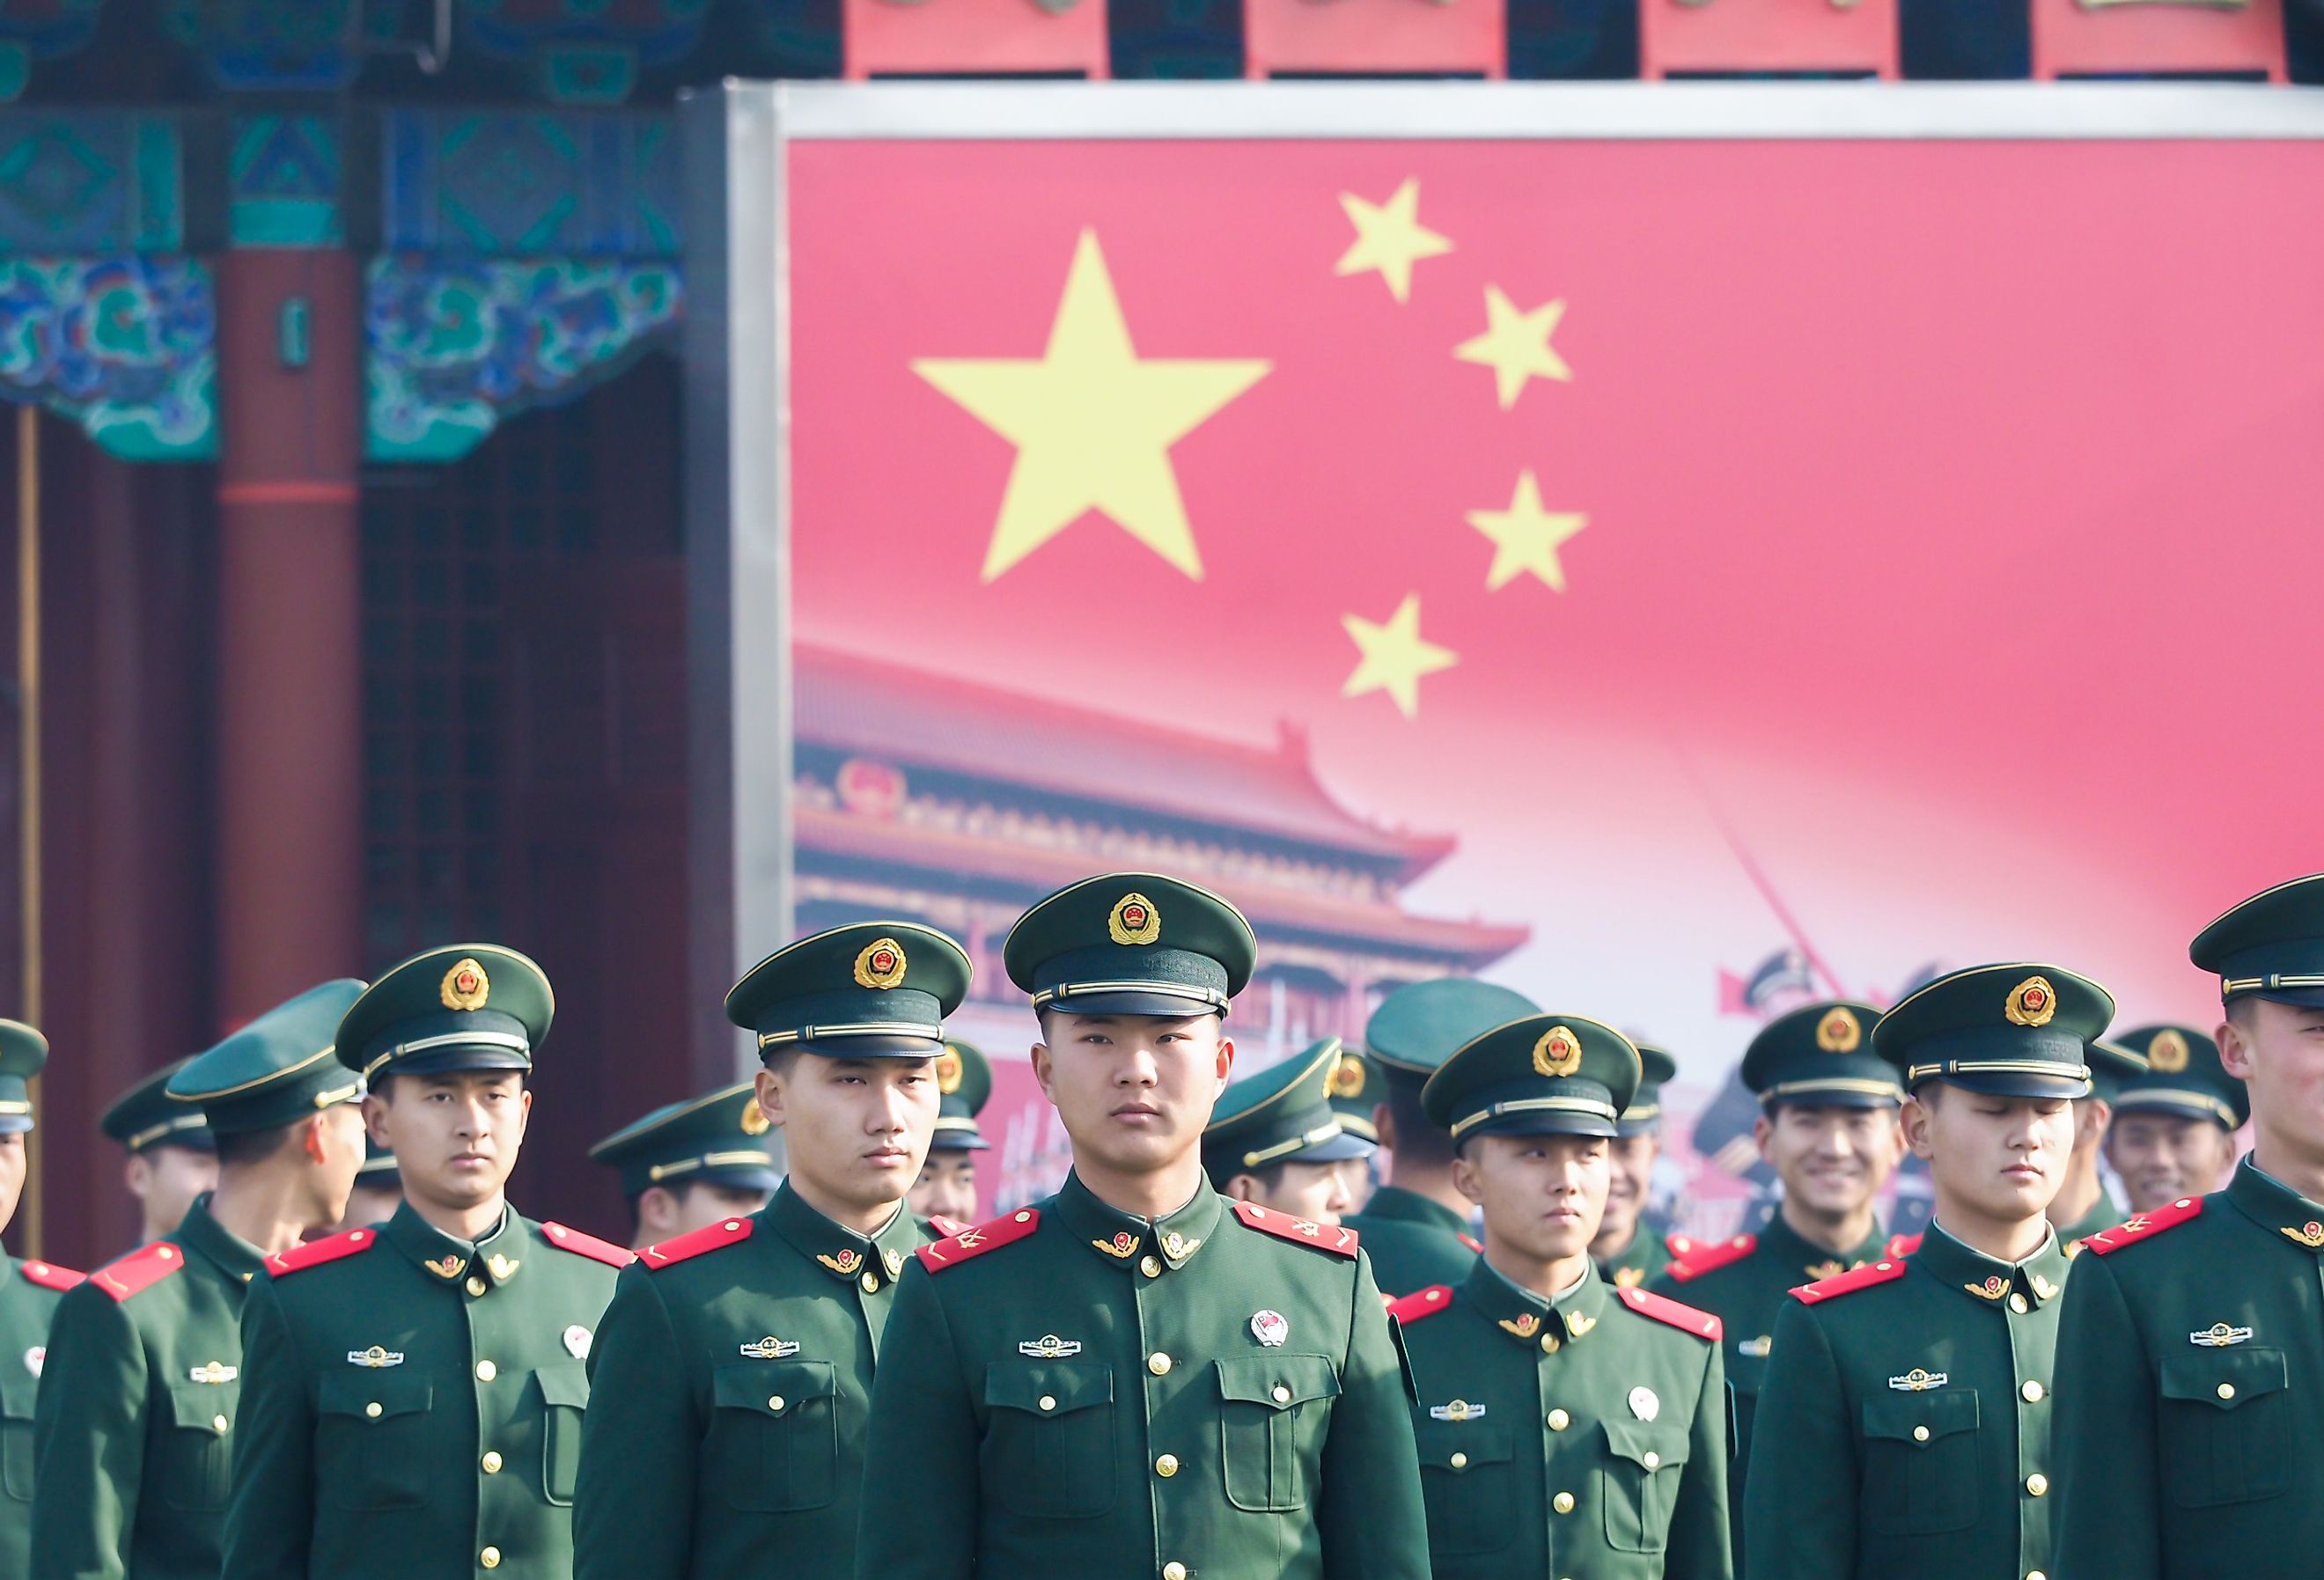 China has the largest active military personnel in the world at 2 million. Image credit Twinsterphoto via Shutterstock